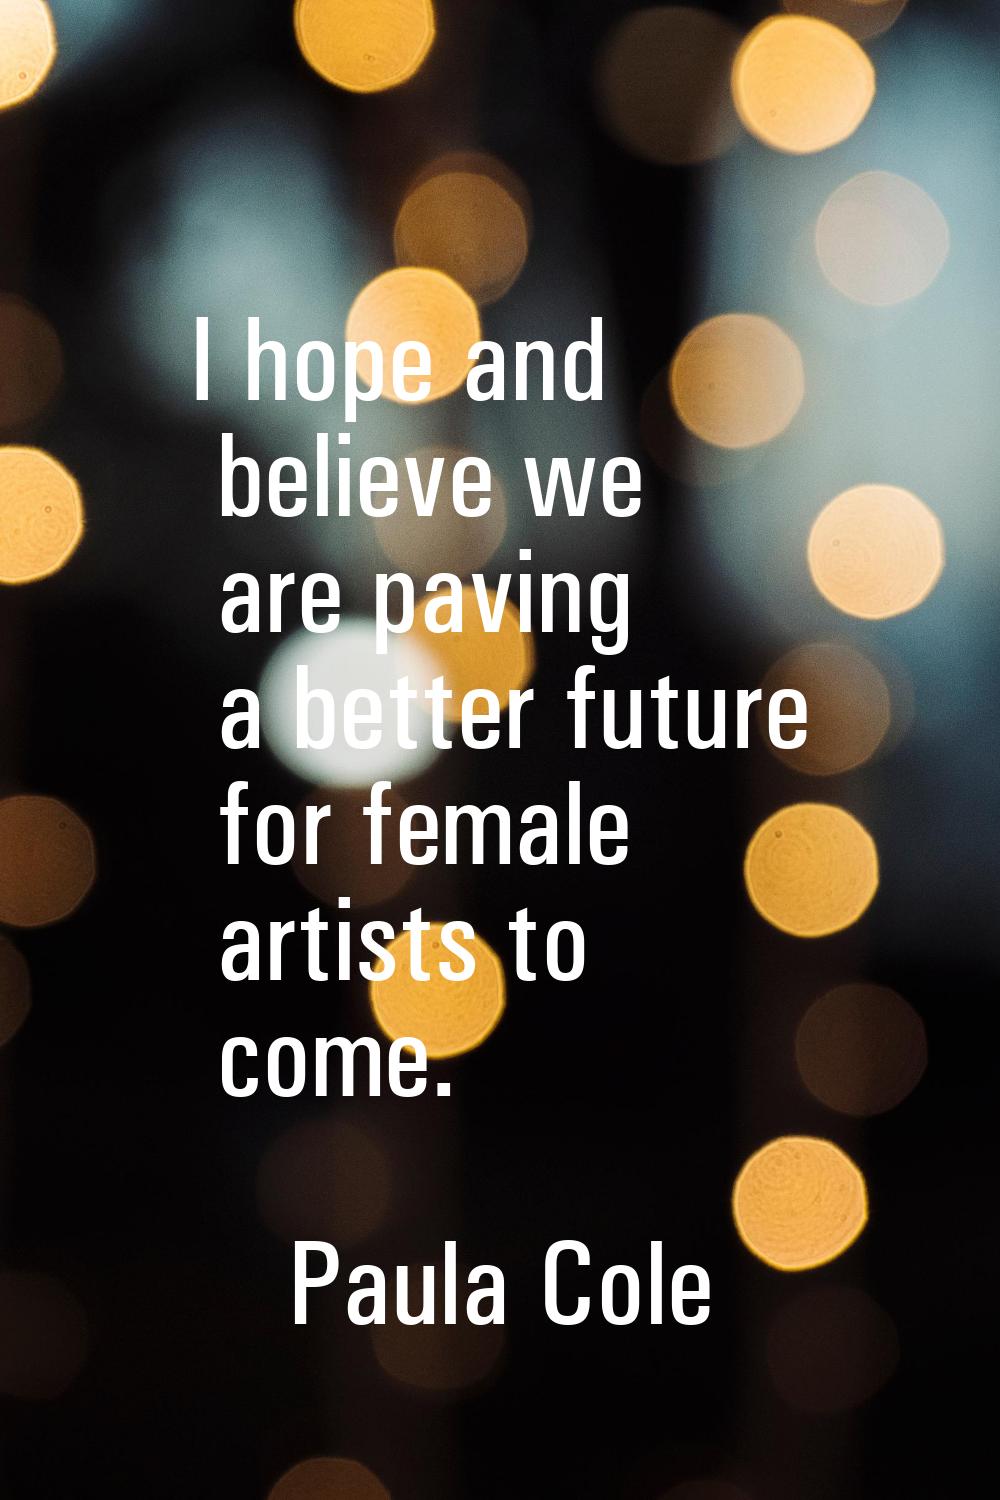 I hope and believe we are paving a better future for female artists to come.